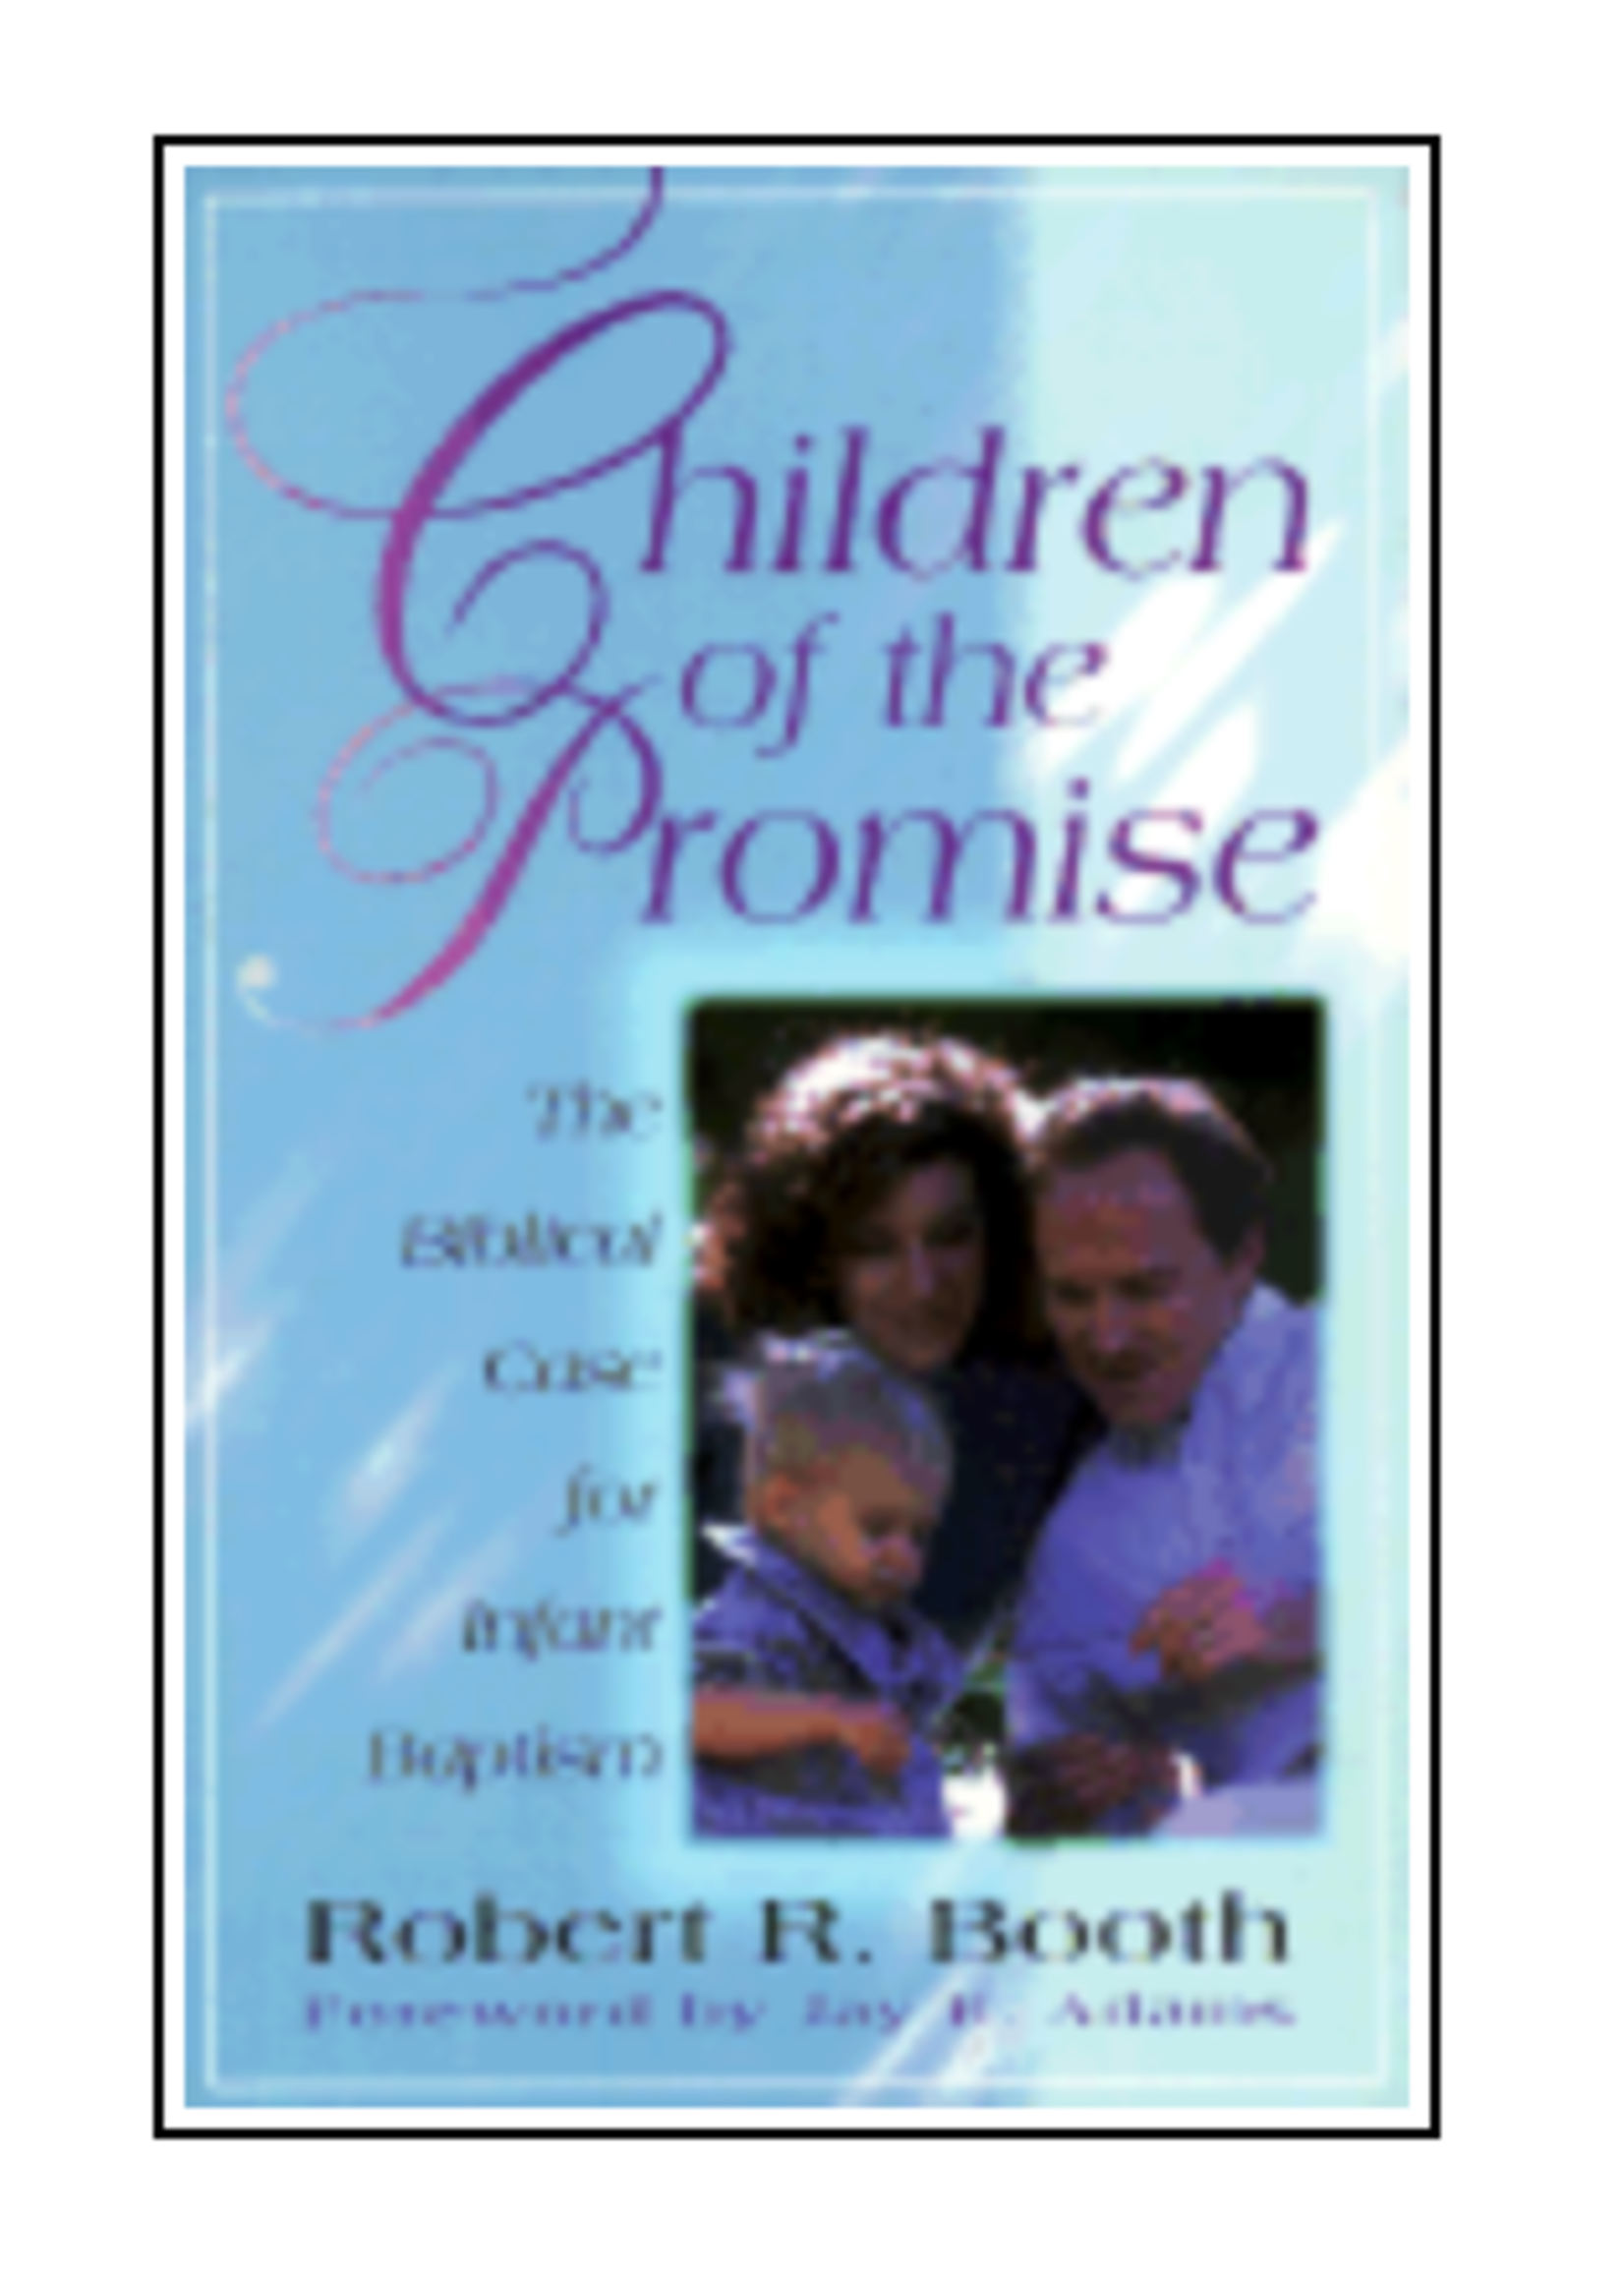 Children of the Promise: The Biblical Case for Infant Baptism [Robert R. Booth]